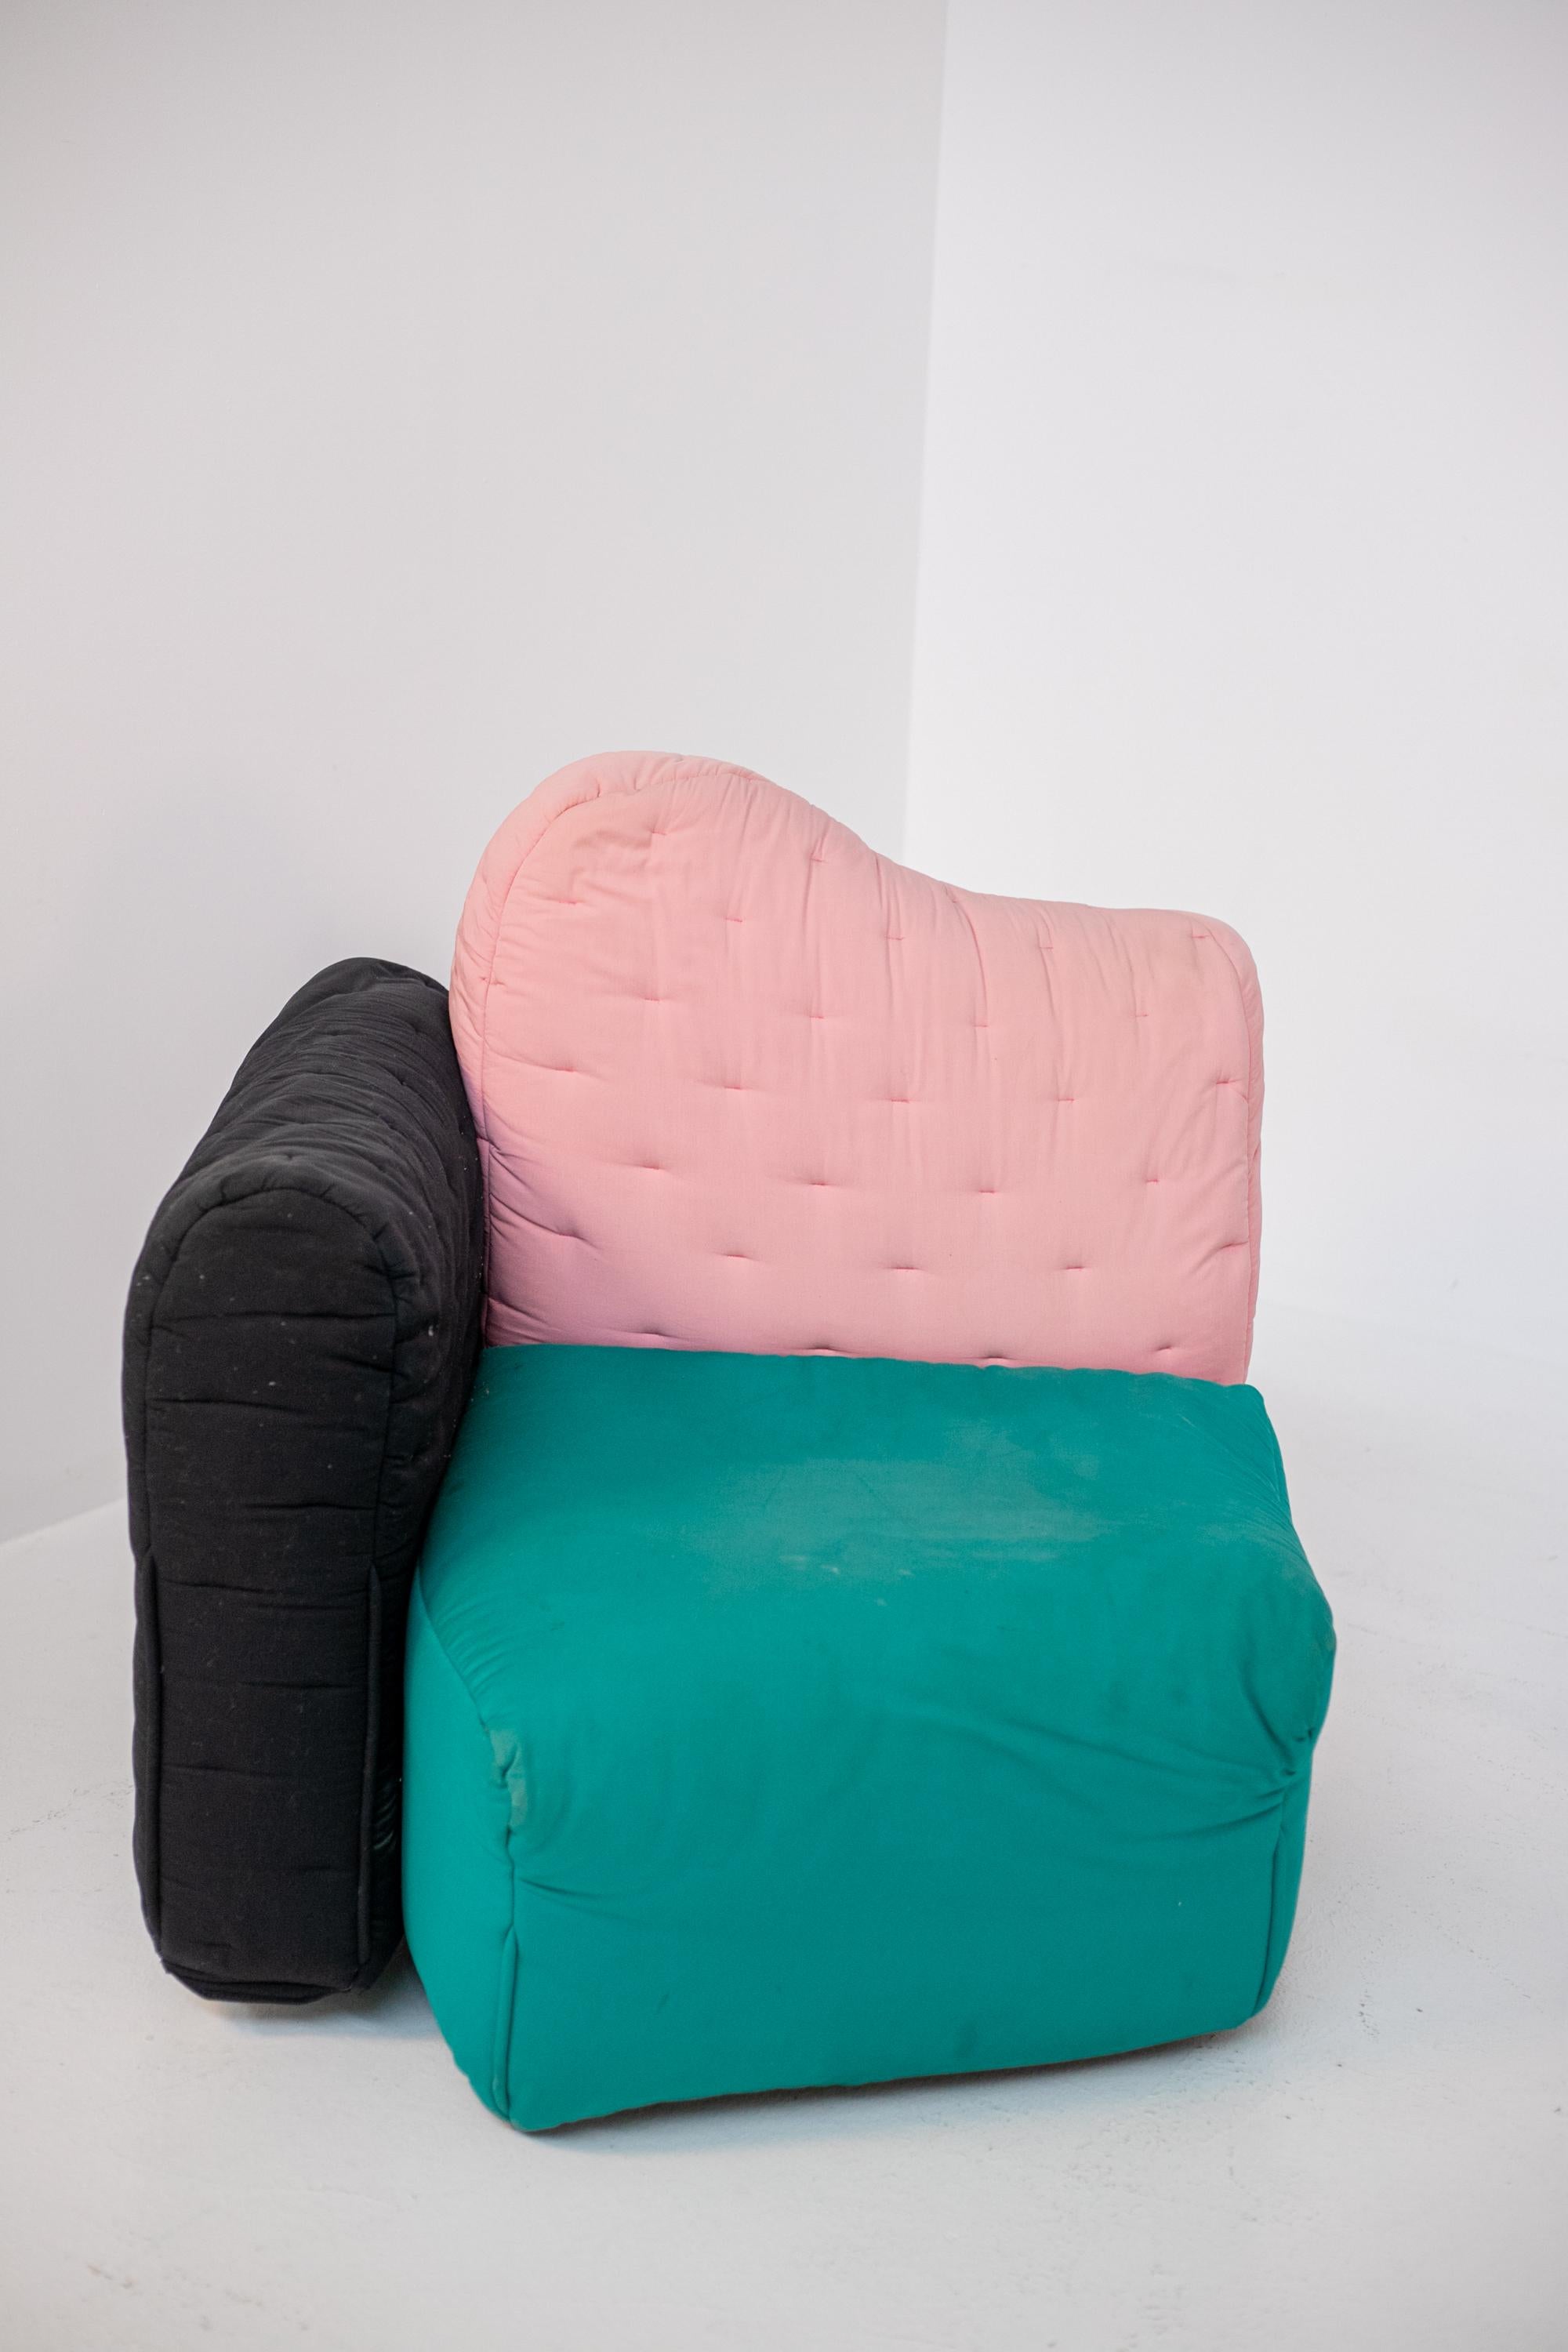 Pair of Italian post-modern armchairs designed by Gaetano Pesce for Cassina from the 1980s.
The armchairs are the famous Cannaregio model from 1987. The pair consists of an armchair without an armrest and a second armchair complete with two